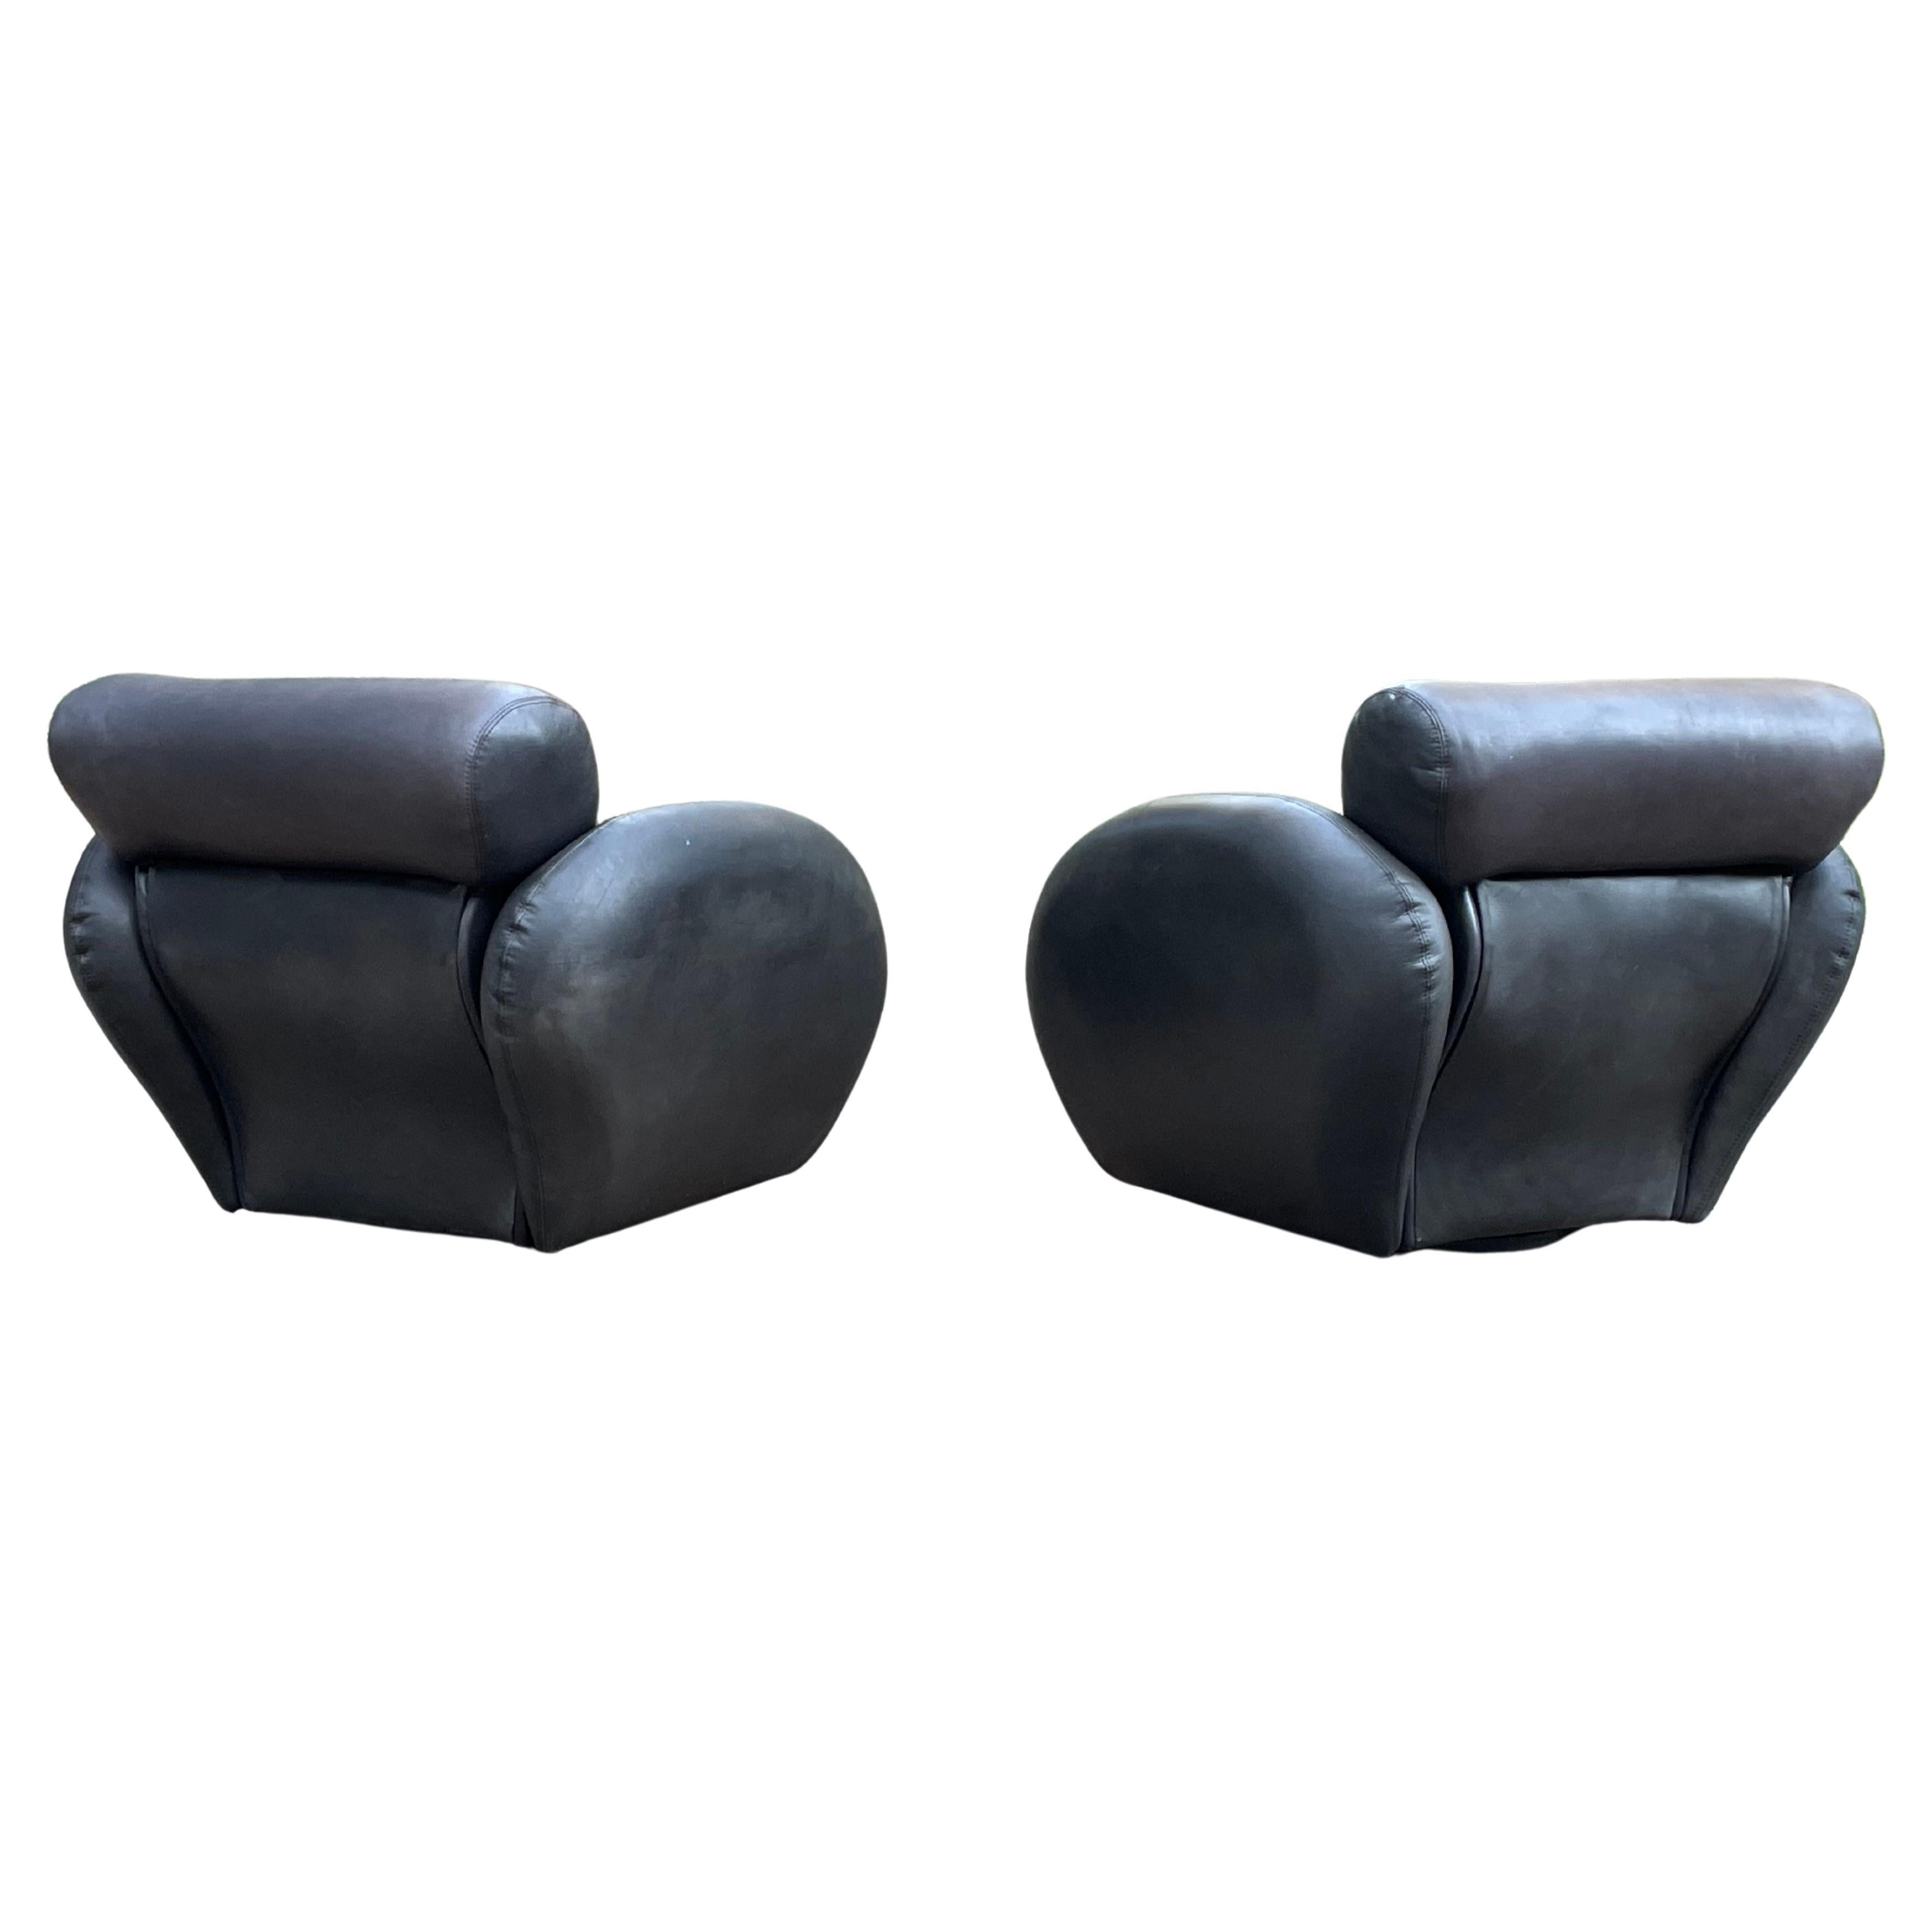 Pair of stunning, large scale leather Directional swivel chairs in soft dark grey leather. The lines on these chairs are insane. 

Vladimir Kagan and Milo Baughman both designed legendary chairs in this era for Directional. 

Very rare pair. With